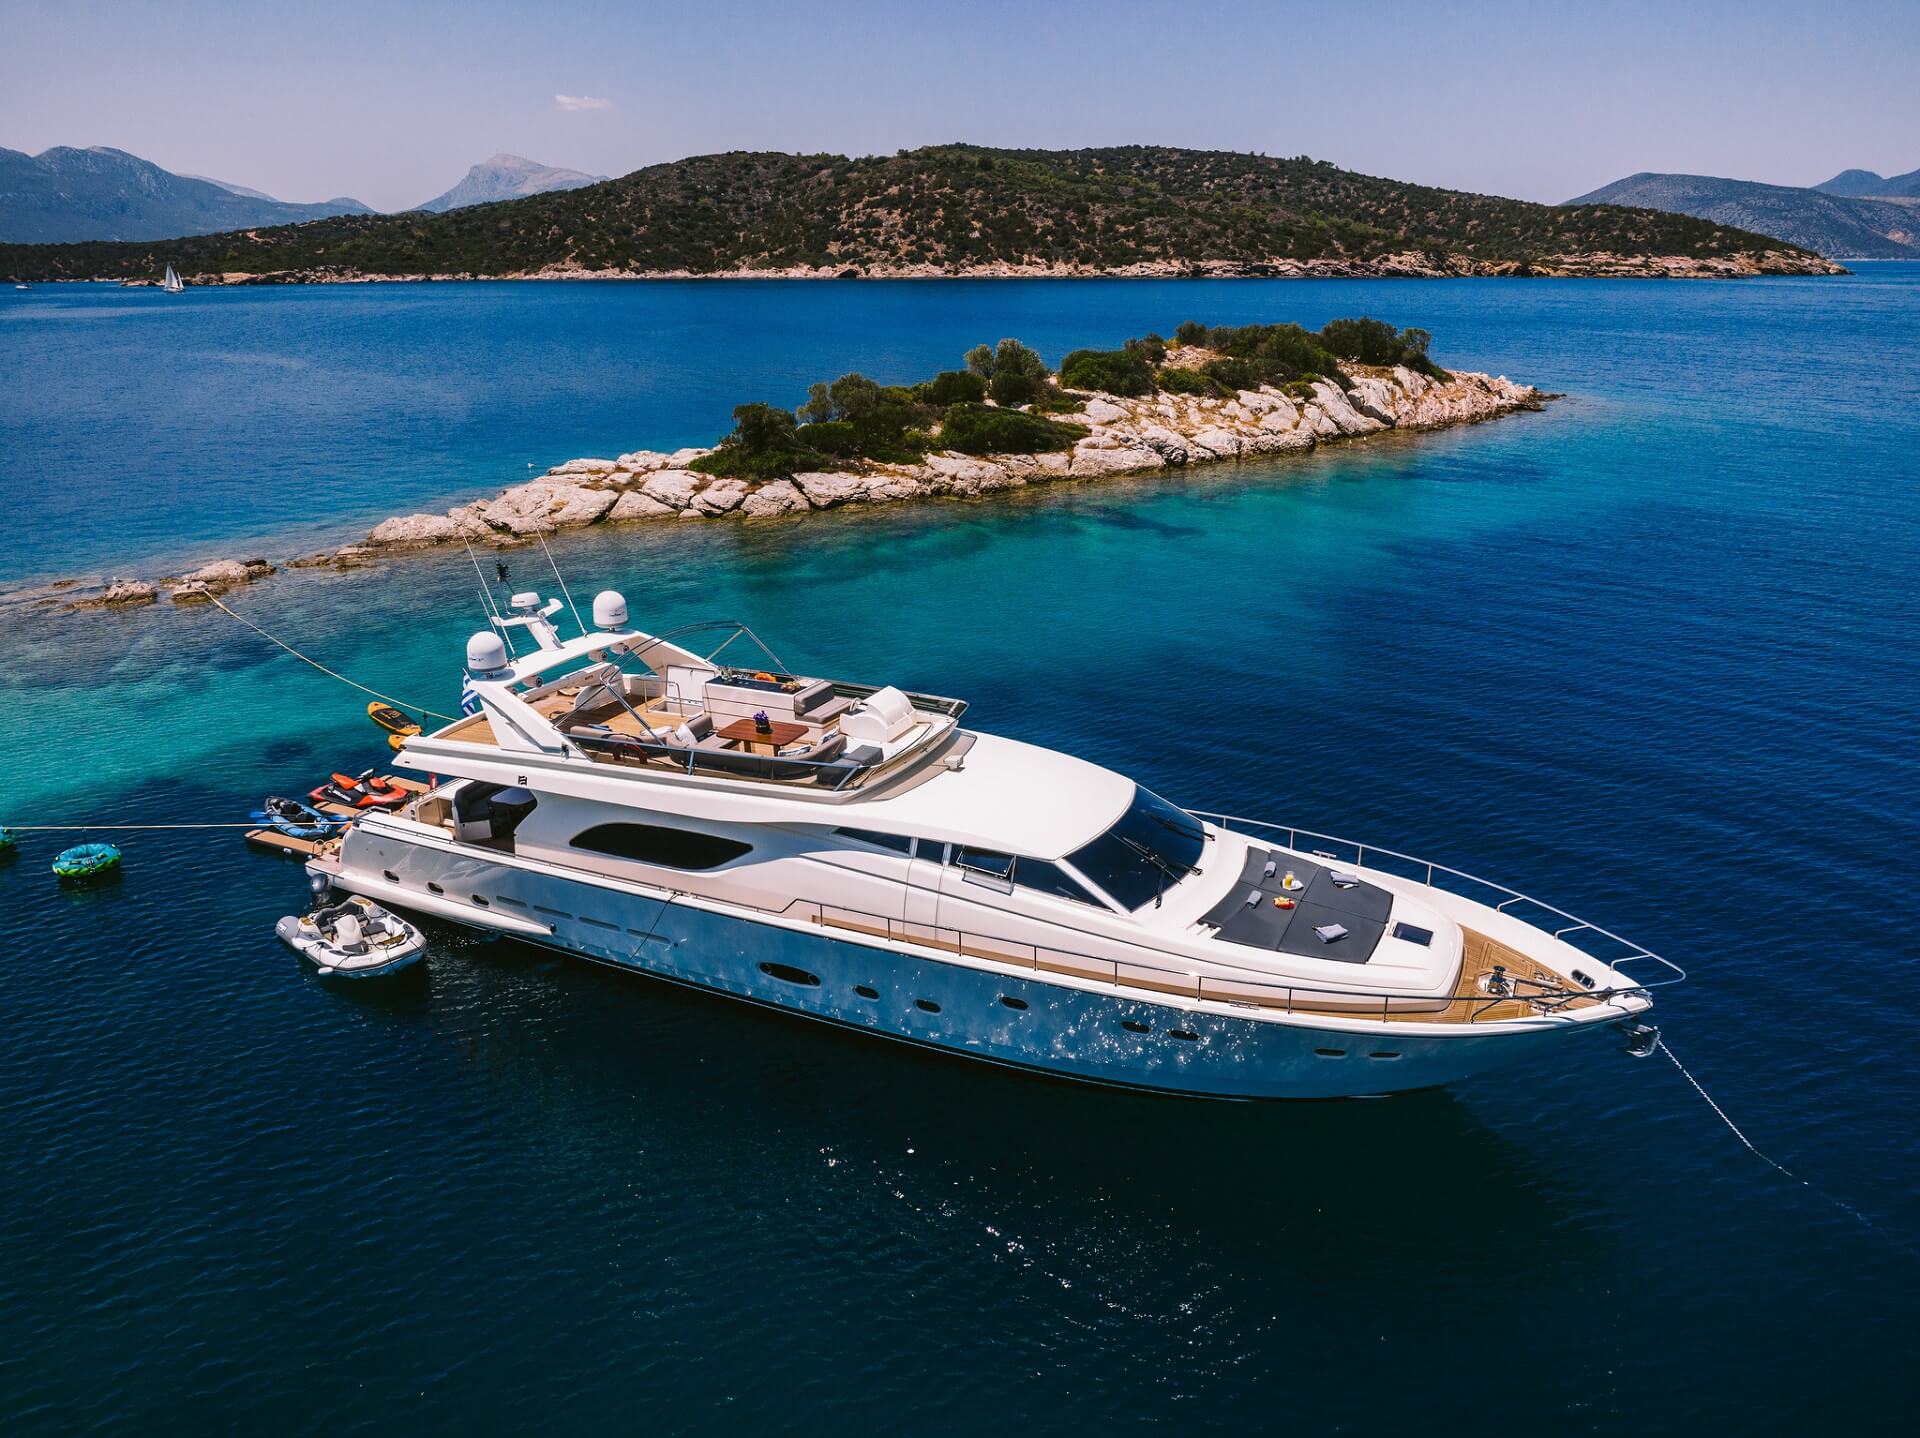 Yacht charters Greece with crew. Motor yacht charter Greek islands. Private yacht sailing in Greece, Mediterranean.